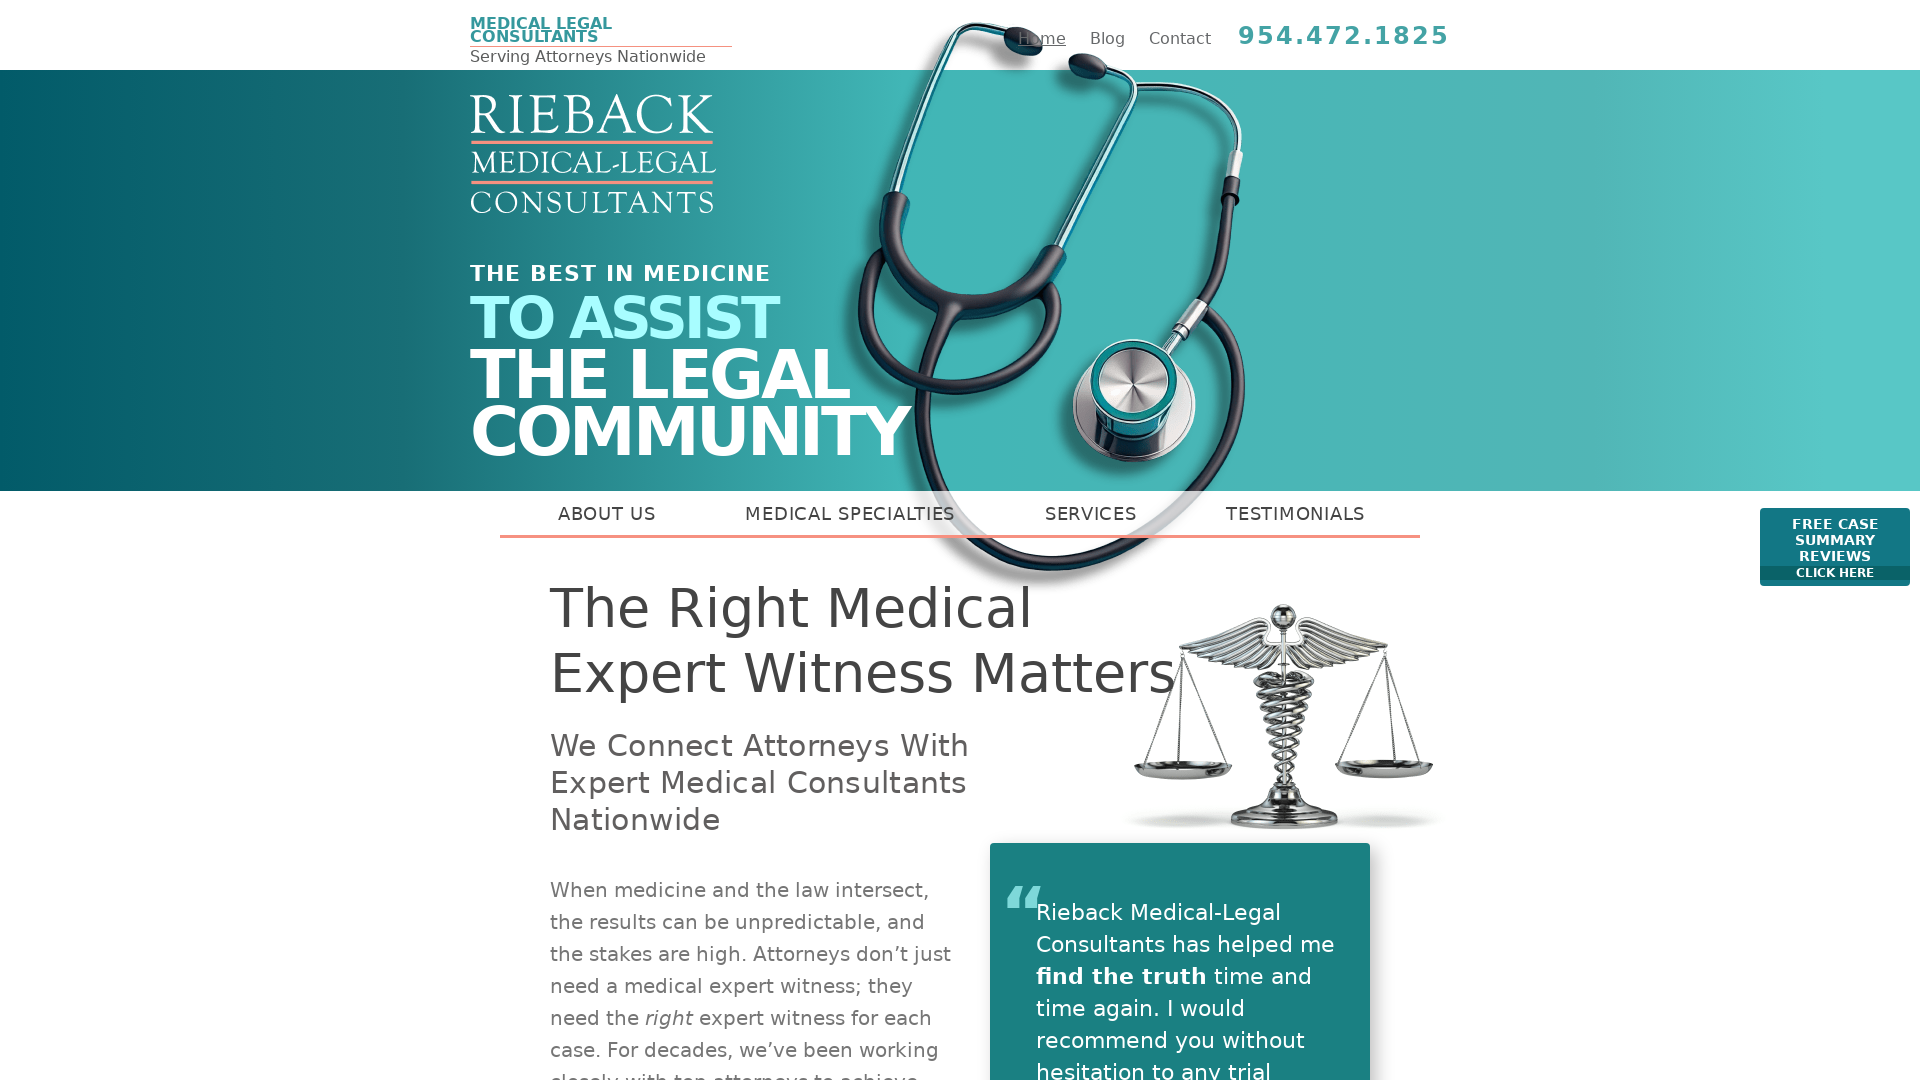 Rieback Medical Legal Consultants